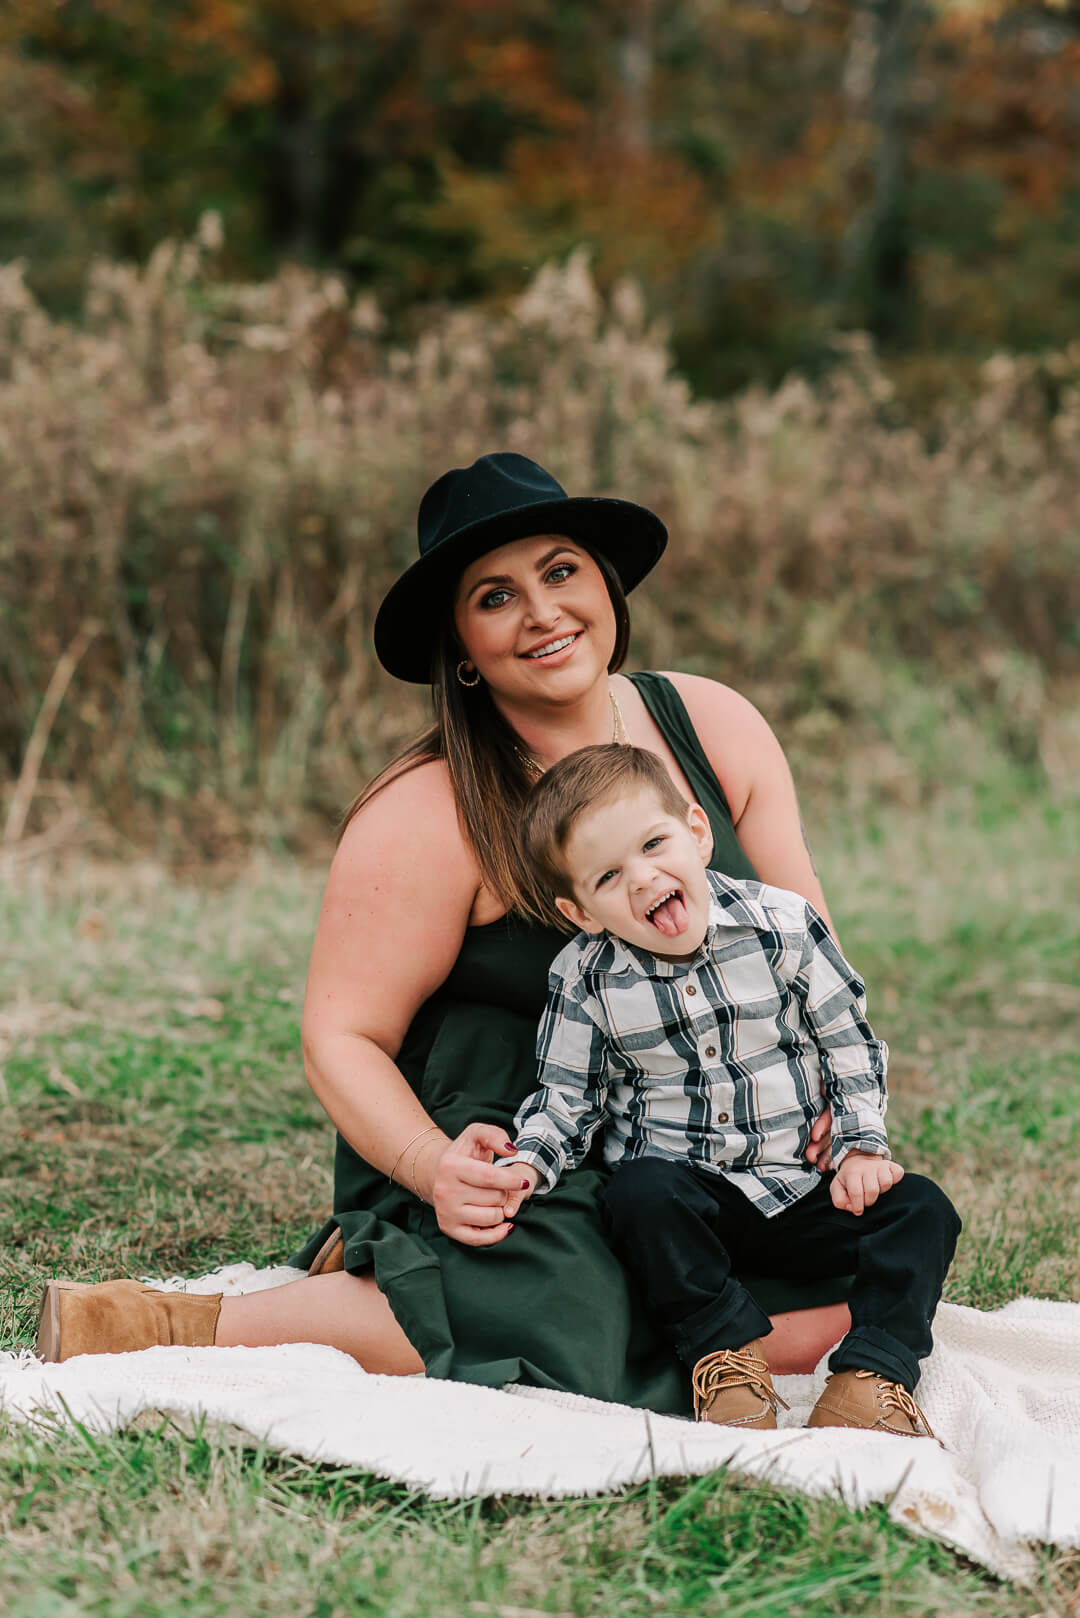 A mother in a black hat and green shirt sits in a park lawn with her toddler son making silly faces on her lap